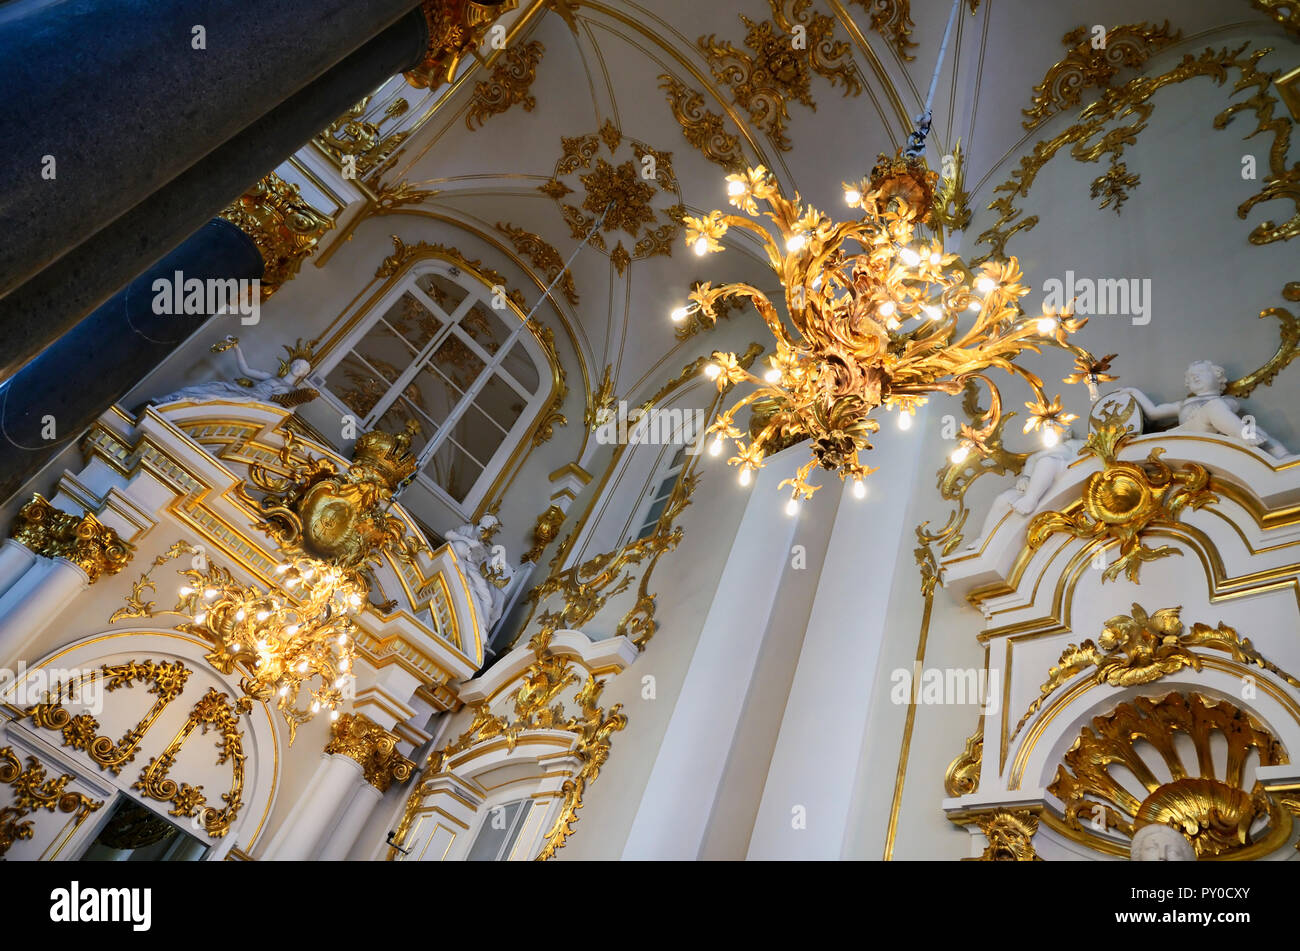 Ceiling and chandelier. The State Hermitage Museum. Saint Petersburg, Northwestern, Russia. Stock Photo